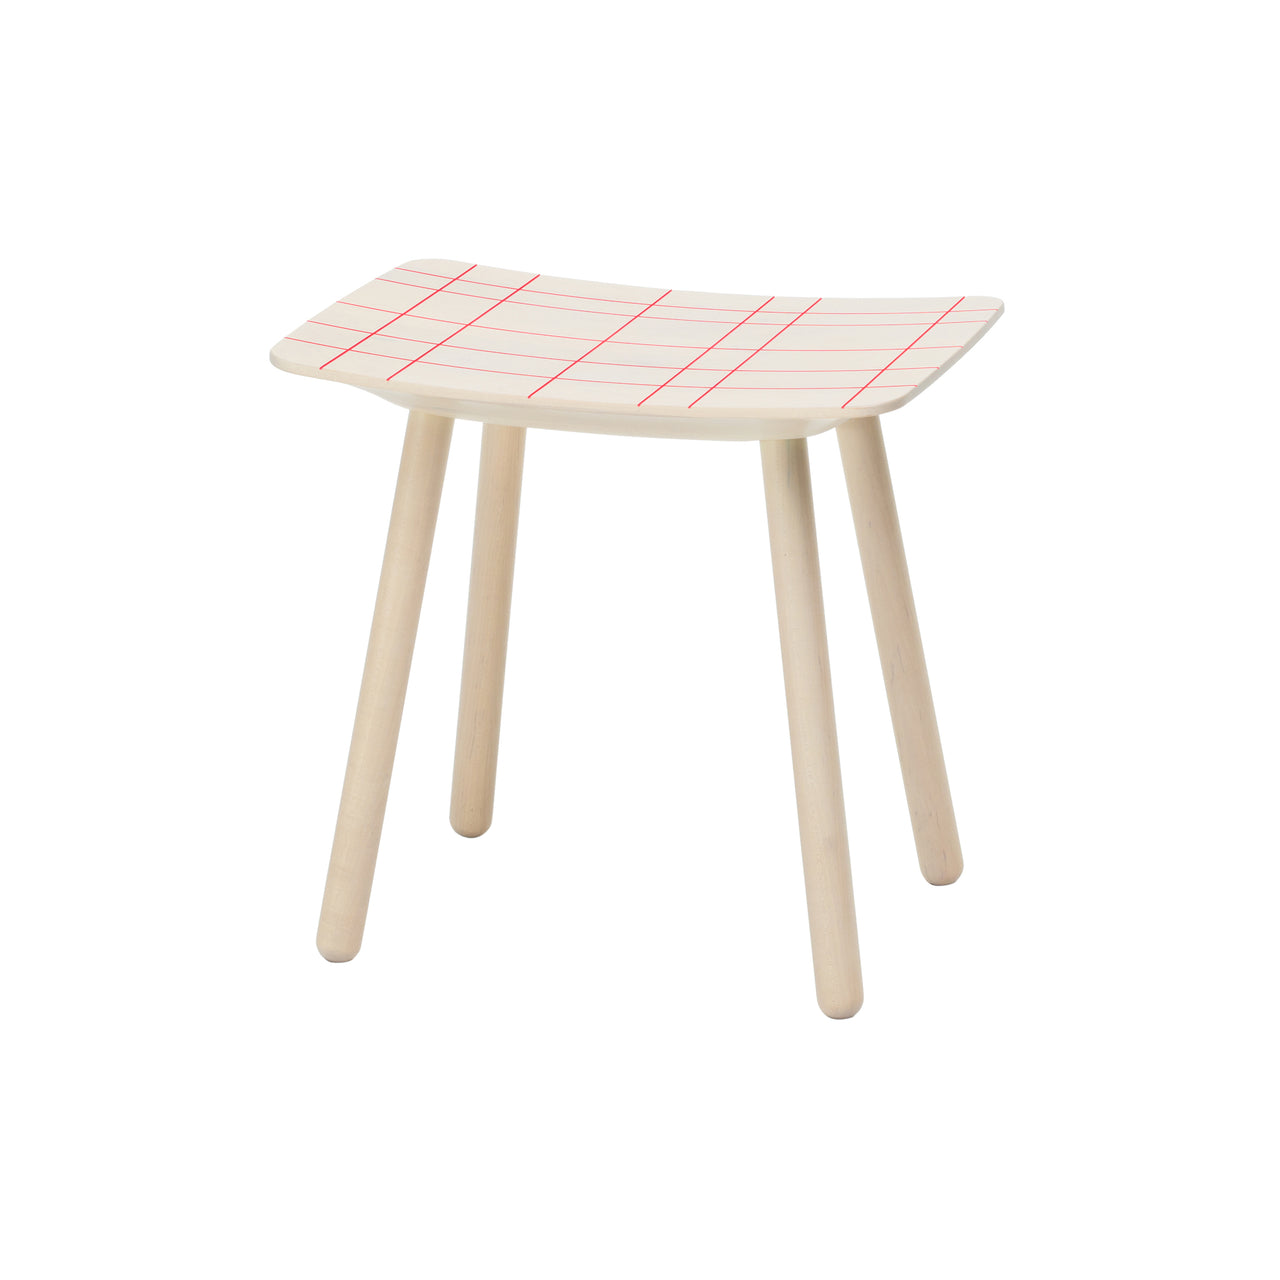 Colour Footstool: Warm White + Pink Grid